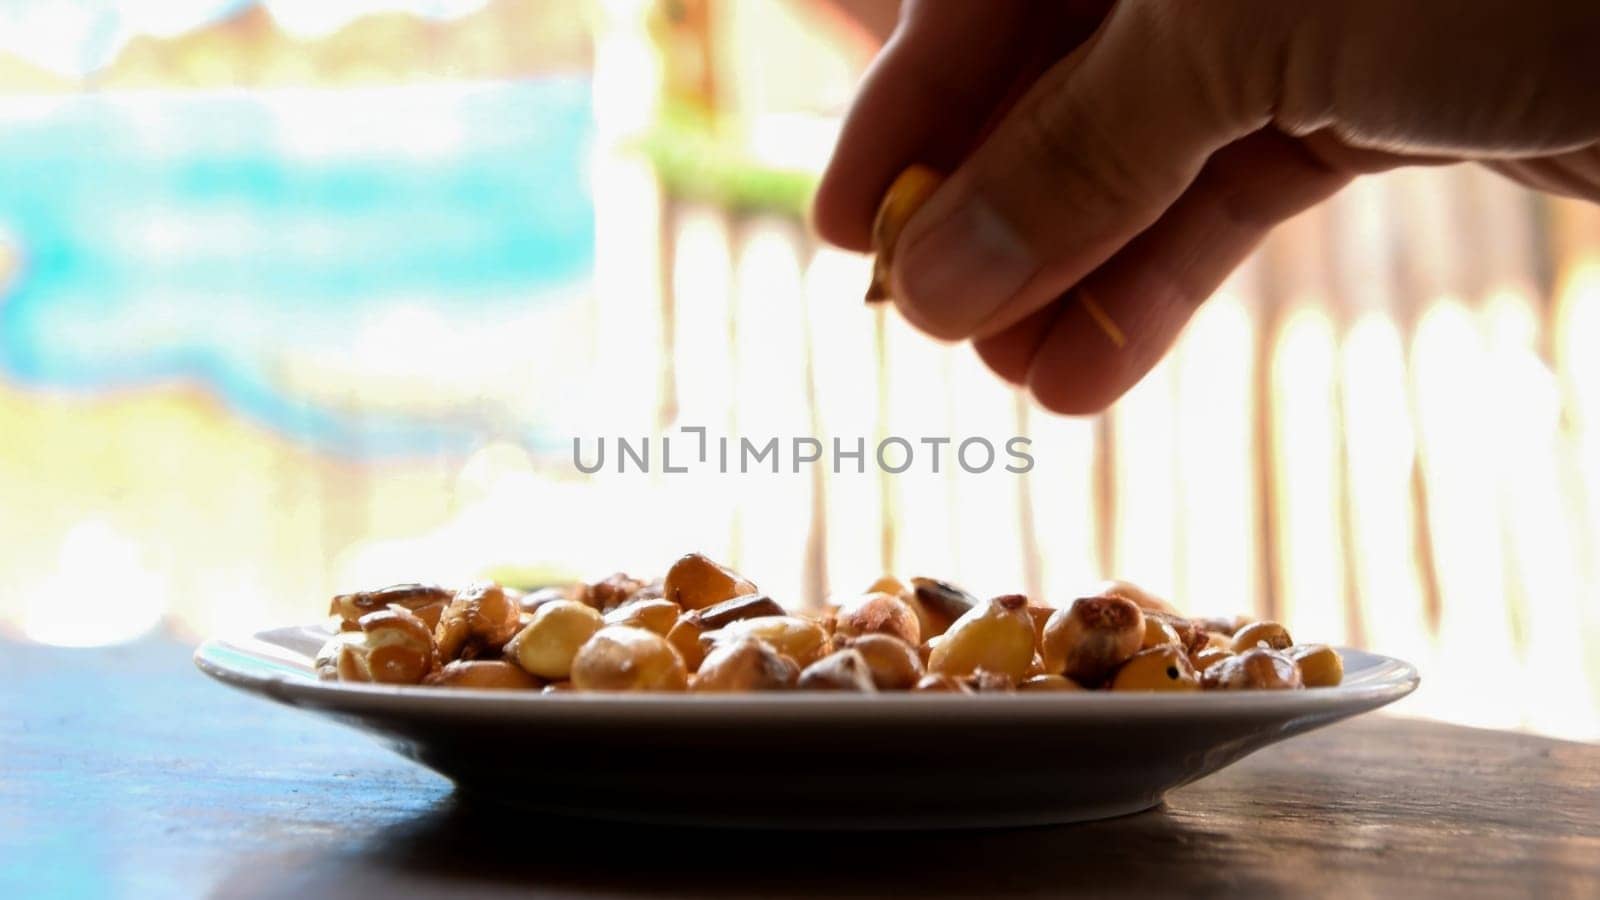 Hand picking nuts from plate against blurred background by Peruphotoart